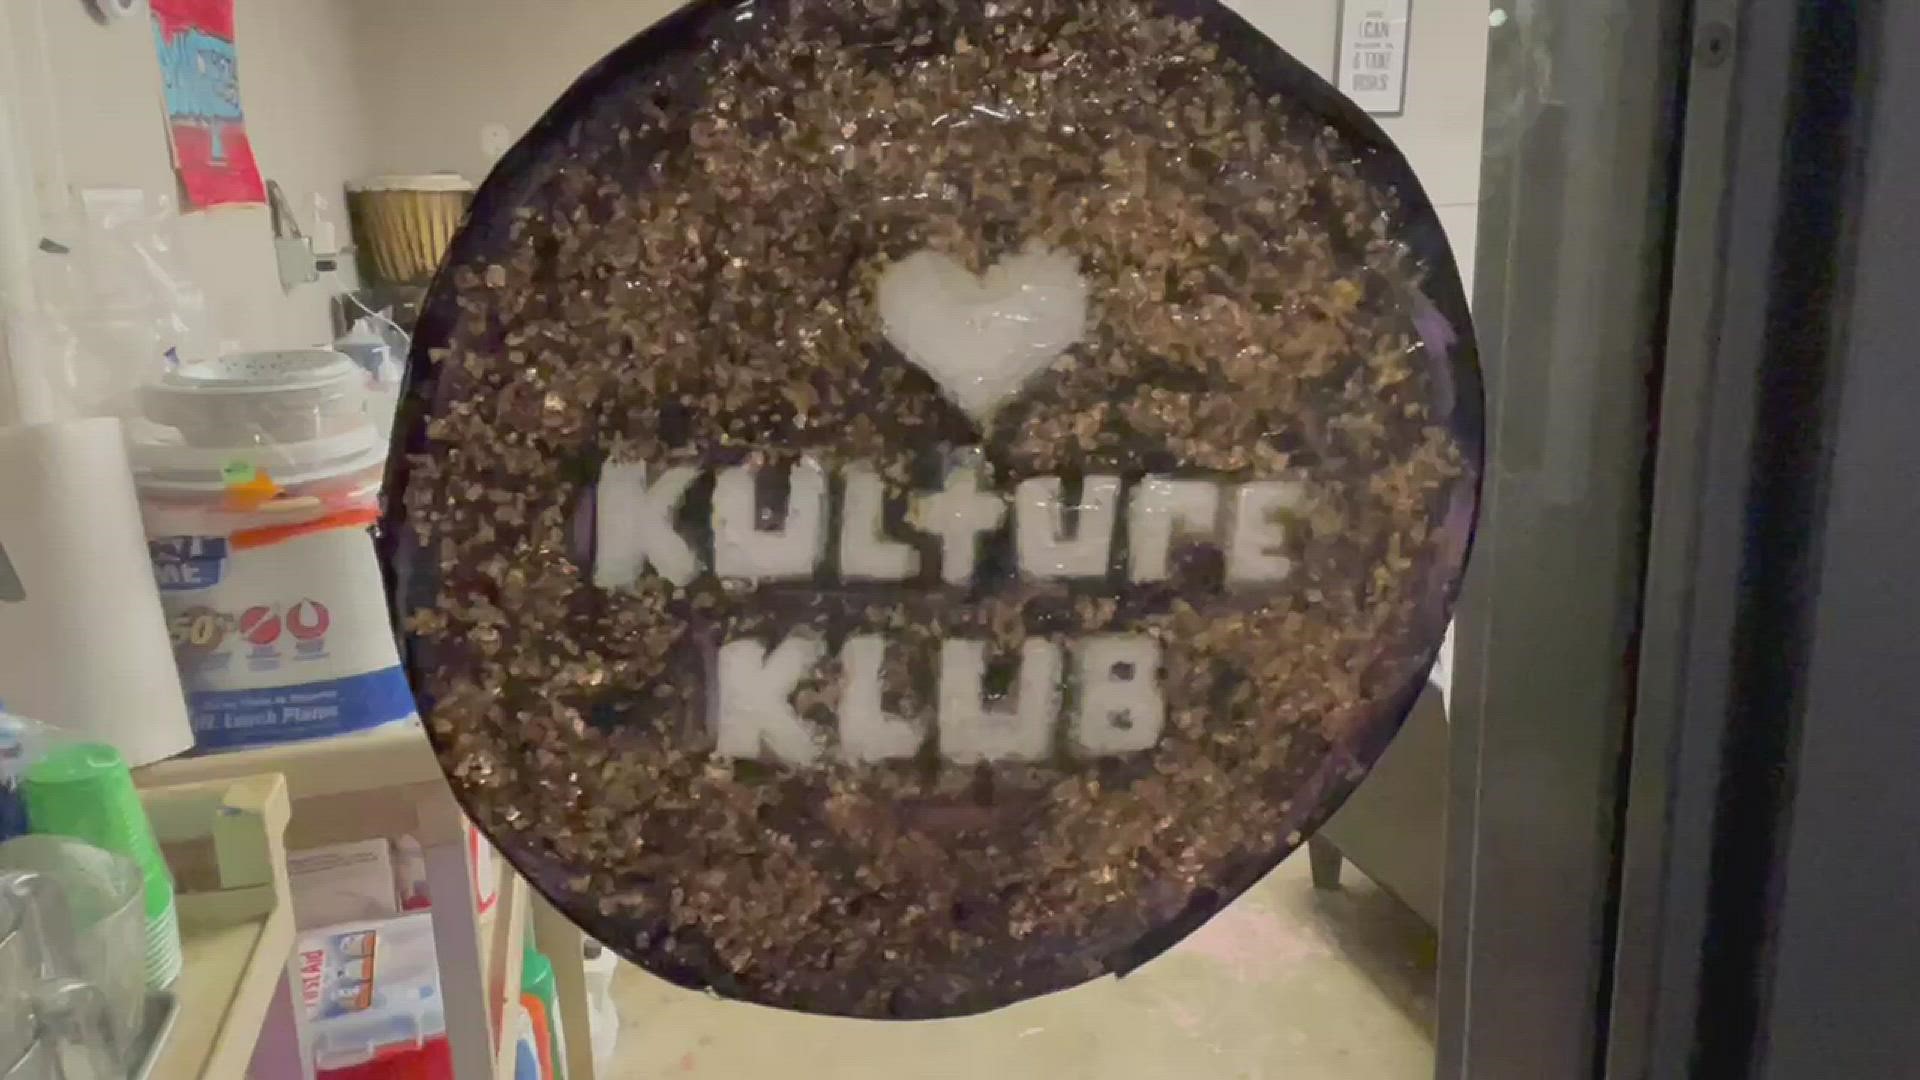 Take a look behind the scenes at Kulture Klub Collective in preparation for the annual Heart of Arts Holiday Benefit.